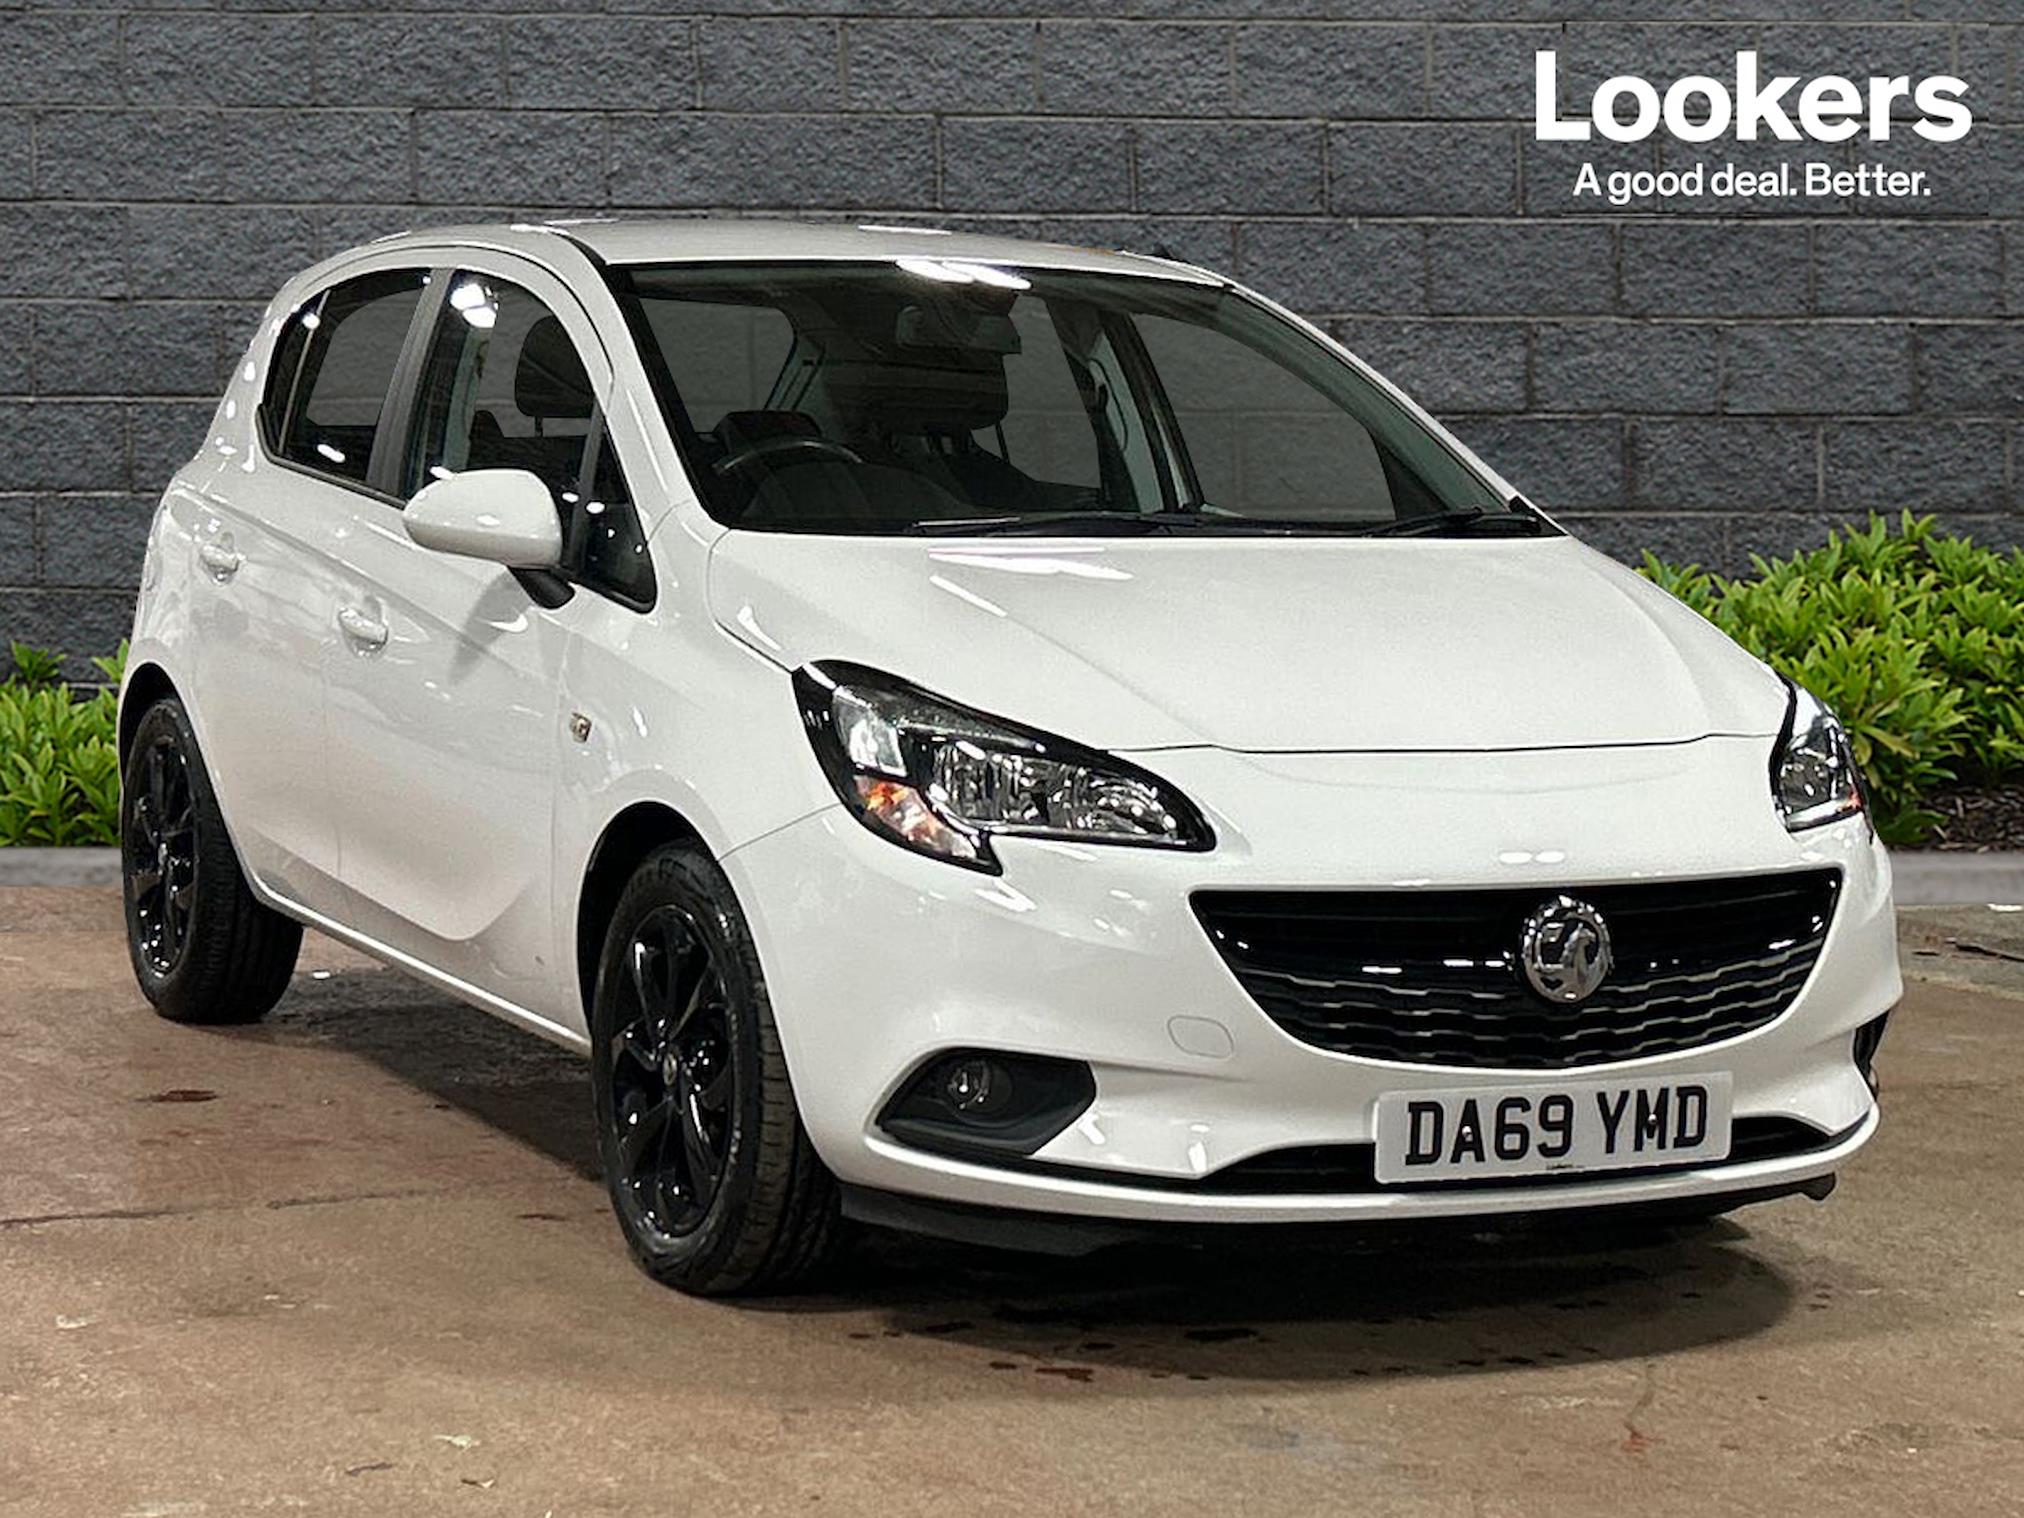 Used VAUXHALL CORSA 1.4 Griffin 5Dr 2019